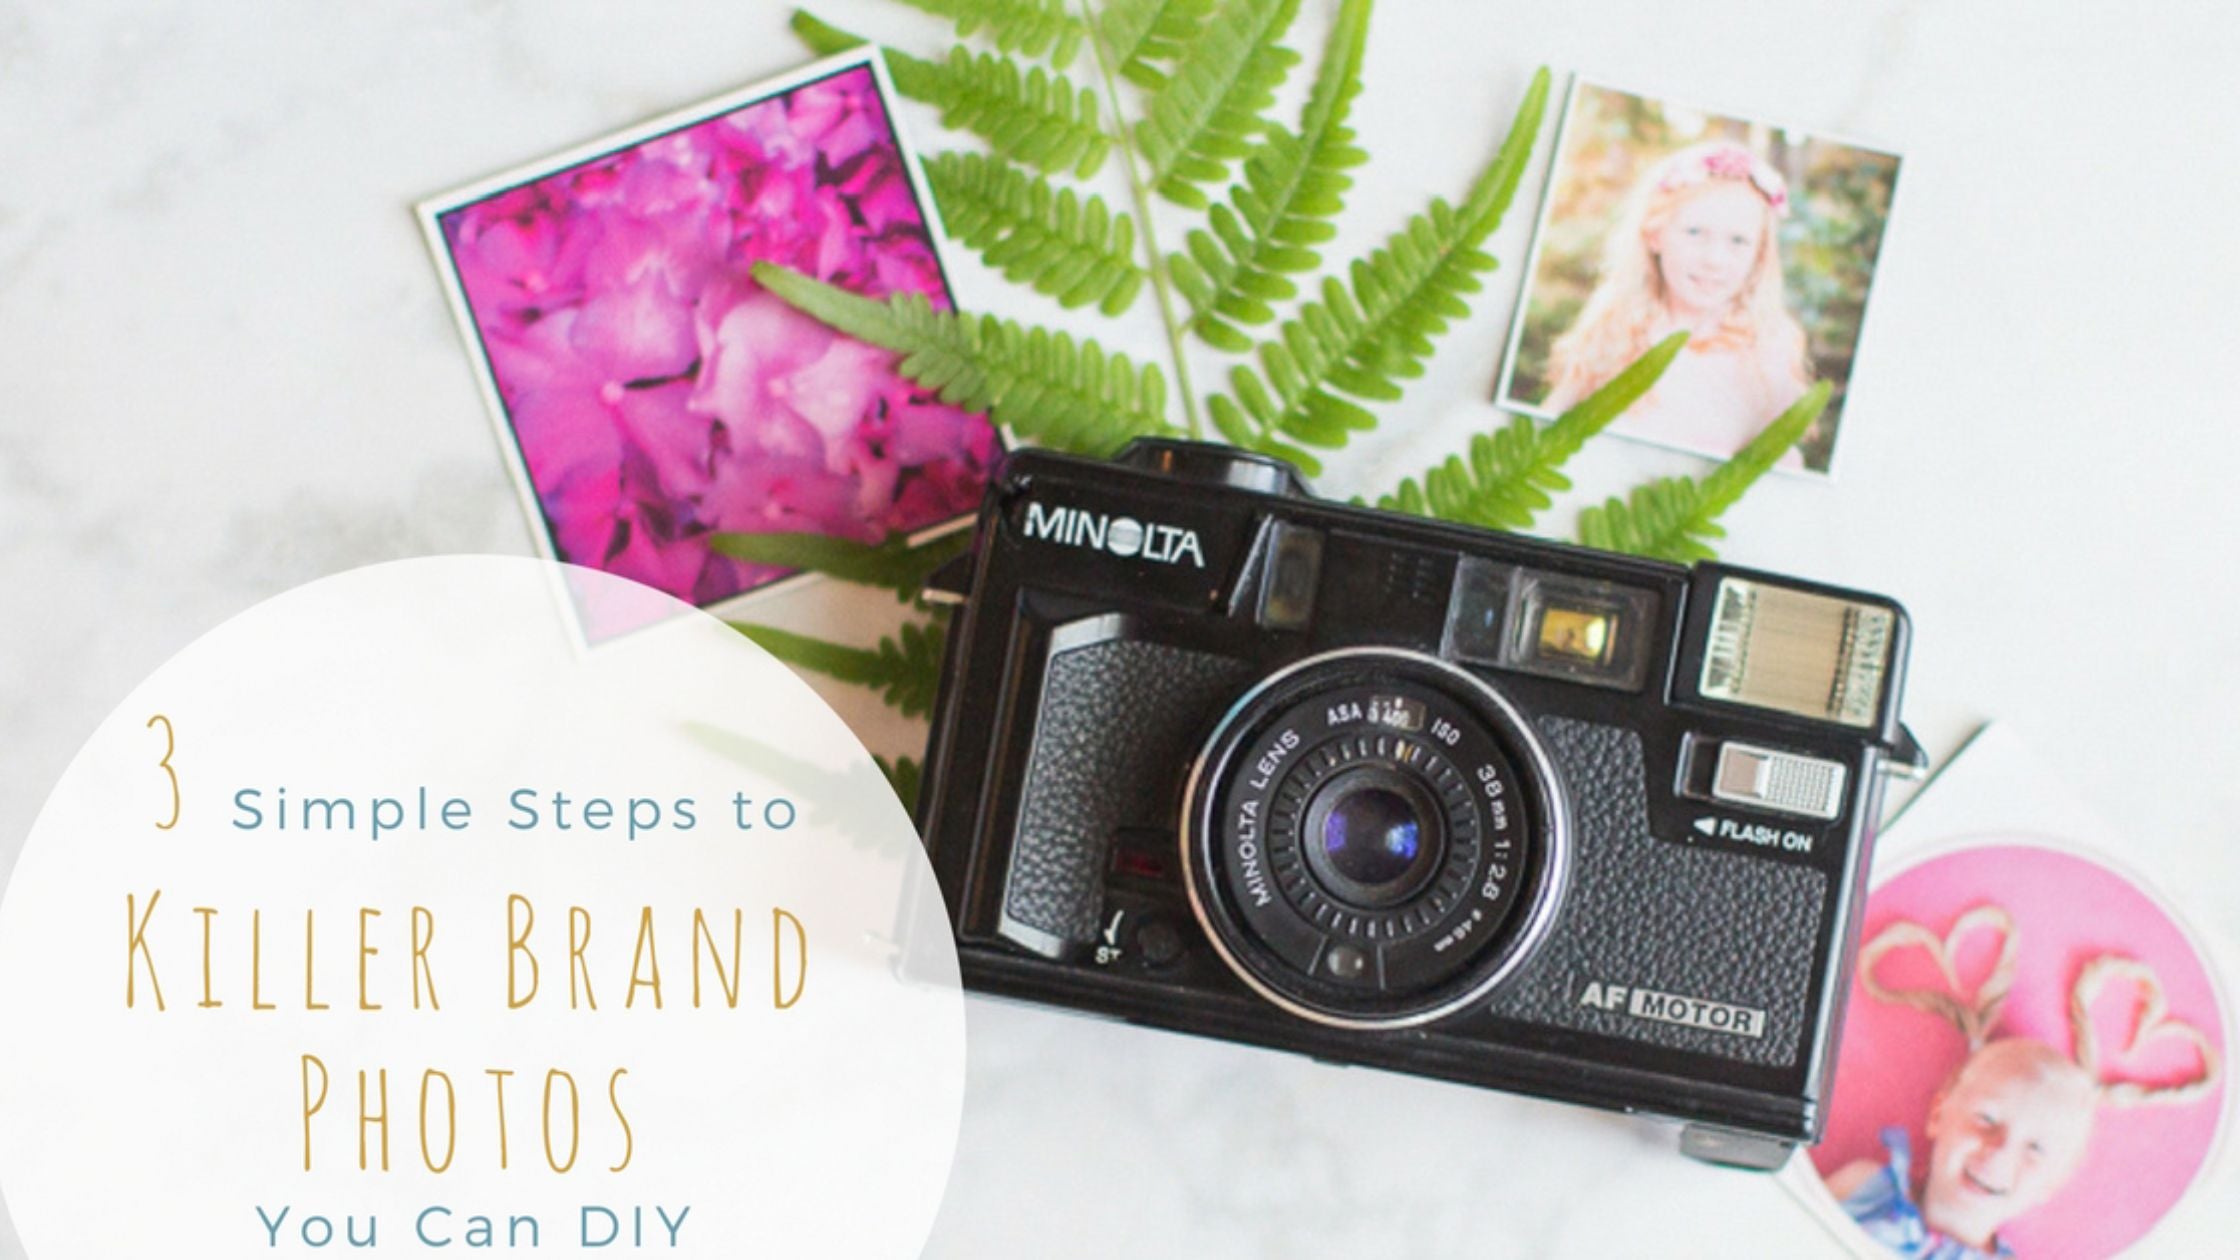 3 Simple Steps to Killer Brand Photos You Can DIY